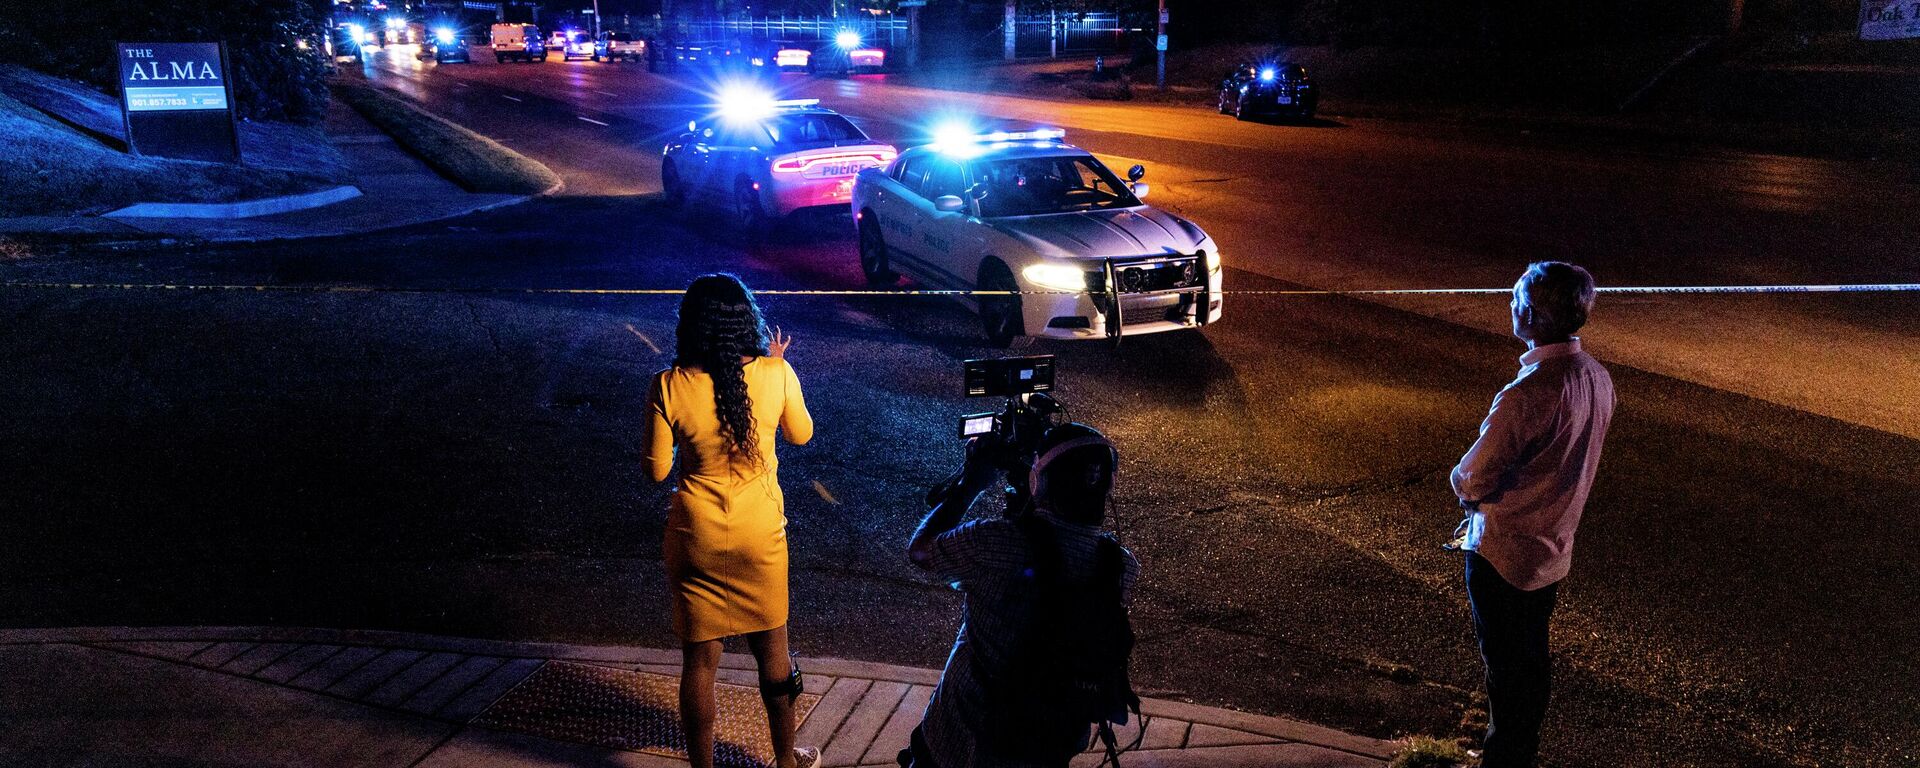 A news crew reports as police investigate the scene of a reported carjacking reportedly connected to a series of shootings on September 7, 2022 in Memphis, Tennessee - Sputnik International, 1920, 08.09.2022